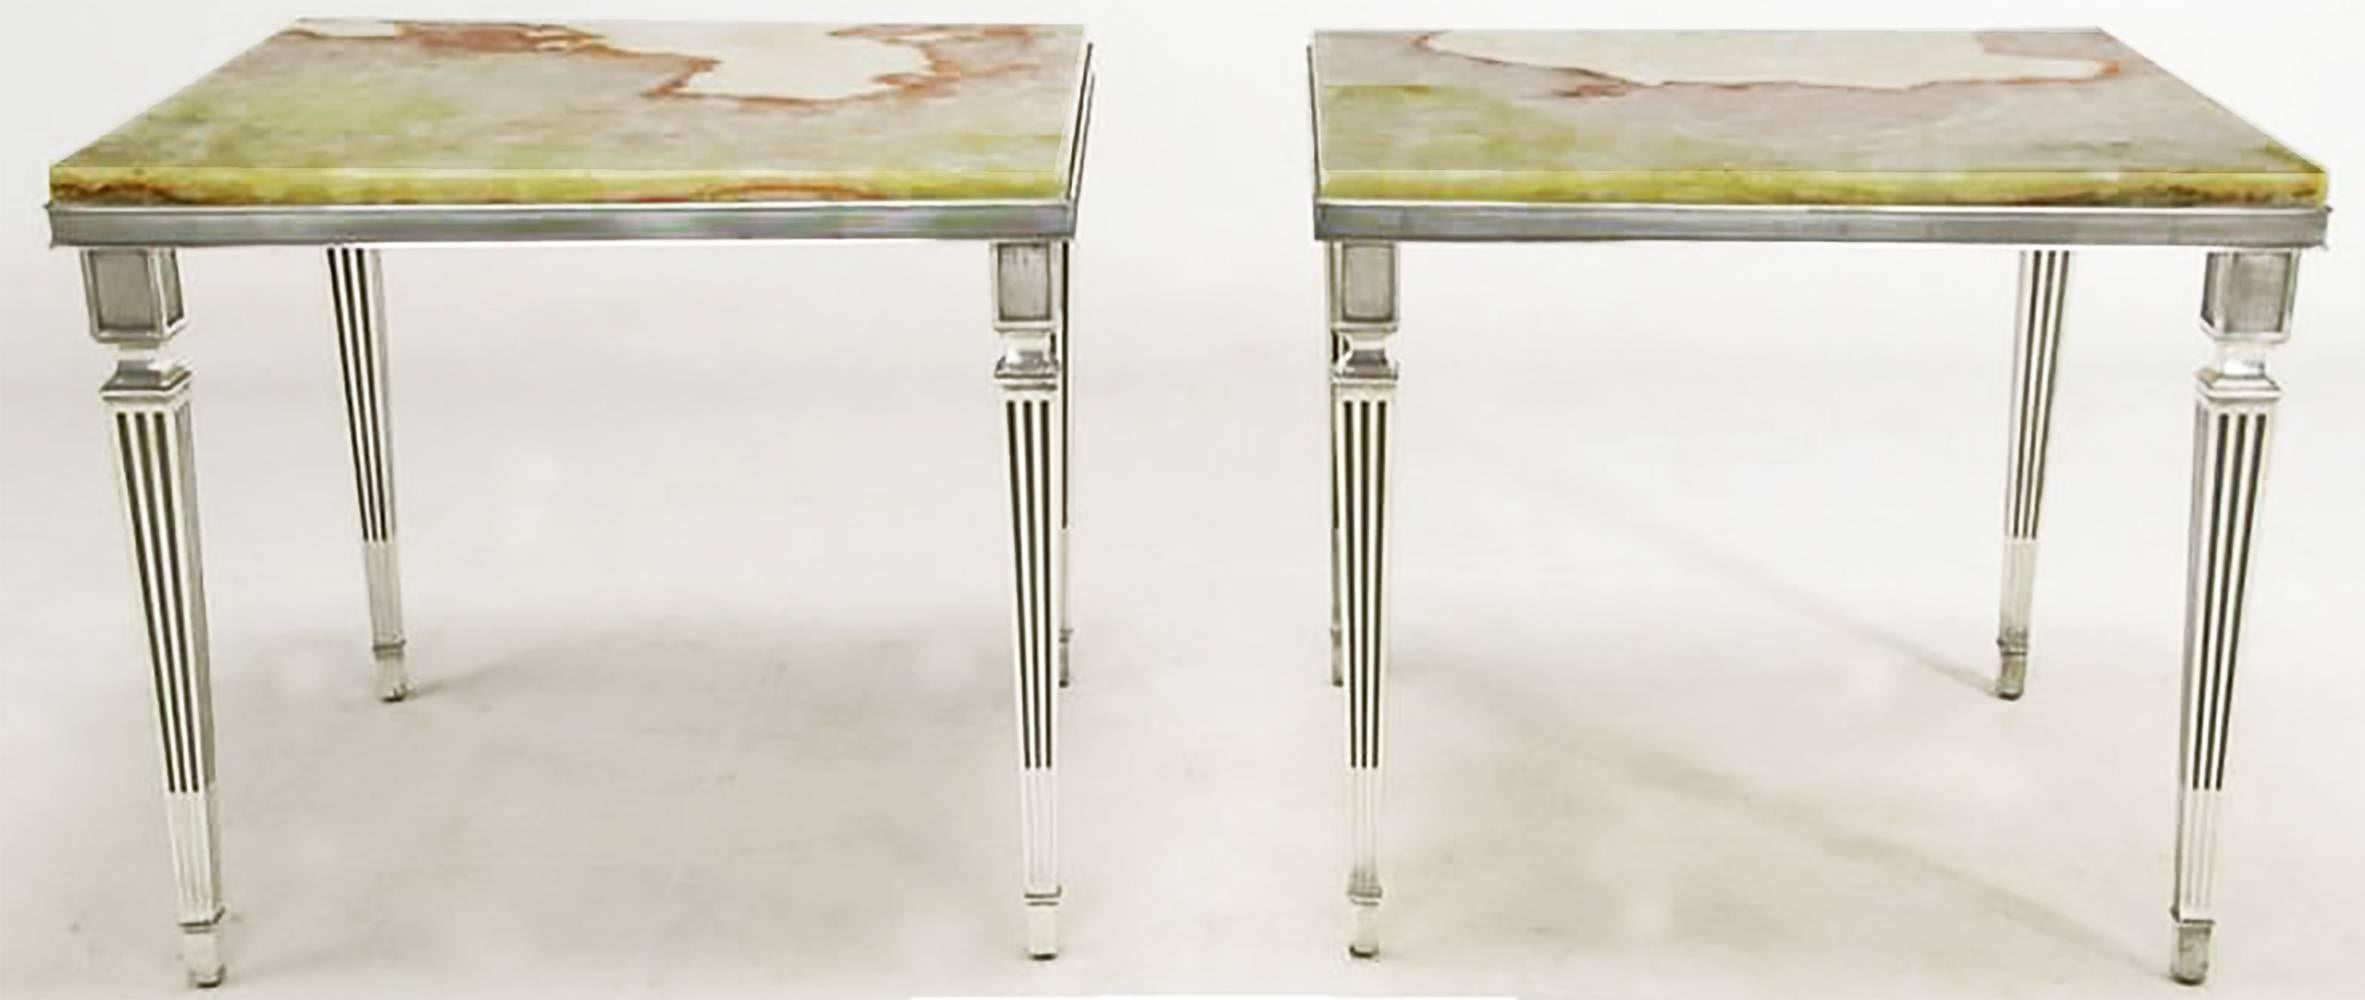 A very substantial pair of neoclassical end tables in the manner of Maison Jansen. This exquisite pair are constructed of solid silverplated bronze. Bronze Louis XVI-style tapered legs and banded ribbon sides support the onyx tops of red, cream and